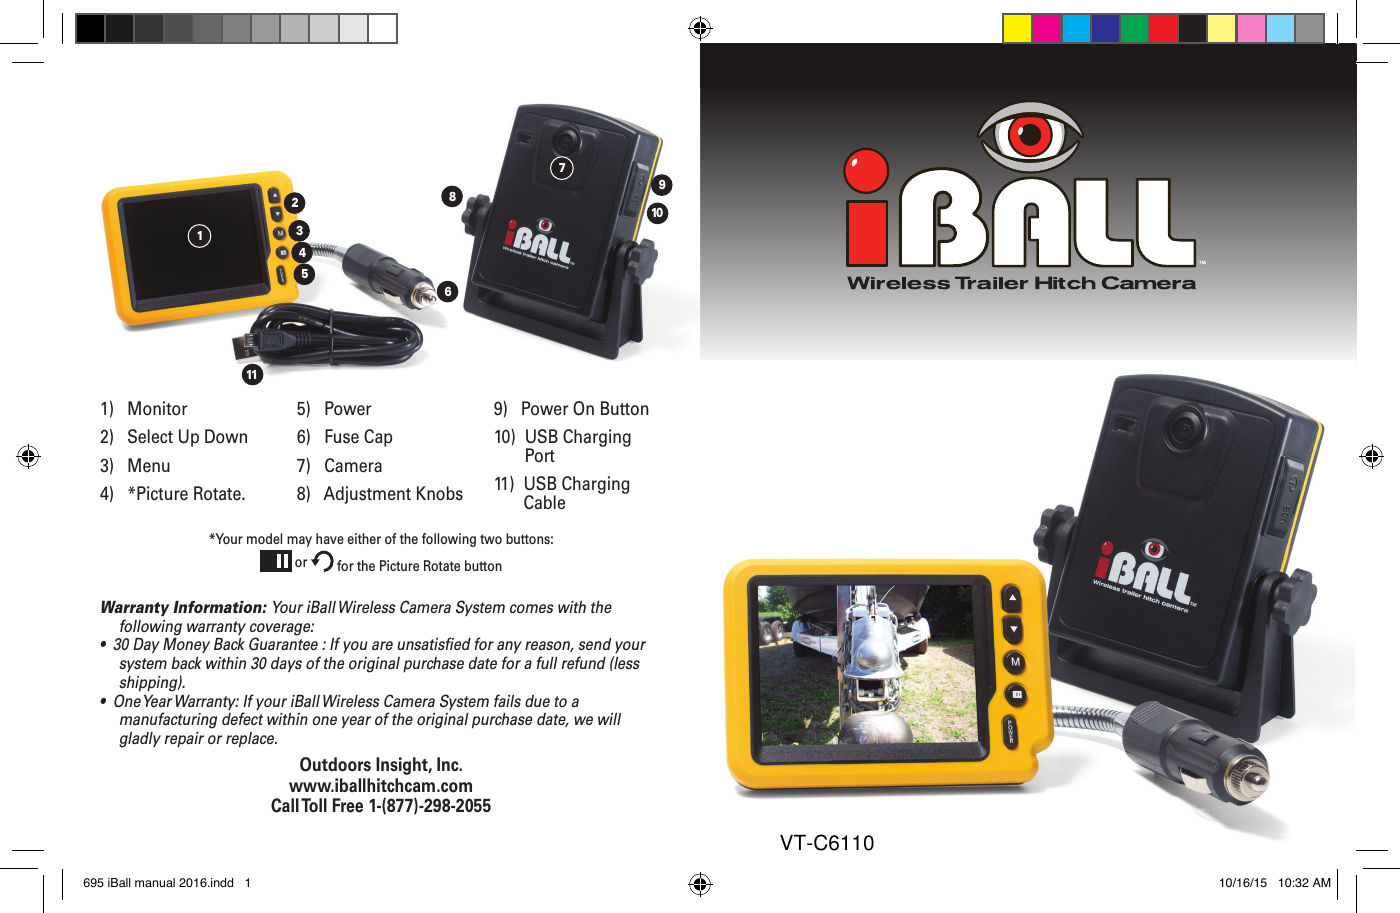 Outdoors Insight, Inc.www.iballhitchcam.comCall Toll Free 1-(877)-298-20551)   Monitor2)    Select Up Down3)   Menu4)   *Picture Rotate. 5)   Power6)   Fuse Cap7)   Camera8)   Adjustment Knobs9)   Power On Button10)   USB Charging Port11)   USB Charging Cable*Your model may have either of the following two buttons:  or   for the Picture Rotate buttonWarranty Information: Your iBall Wireless Camera System comes with the following warranty coverage:•  30 Day Money Back Guarantee : If you are unsatised for any reason, send your system back within 30 days of the original purchase date for a full refund (less shipping).•  One Year Warranty: If your iBall Wireless Camera System fails due to a manufacturing defect within one year of the original purchase date, we will gladly repair or replace.1198213456710695 iBall manual 2016.indd   1 10/16/15   10:32 AMVT-C6110